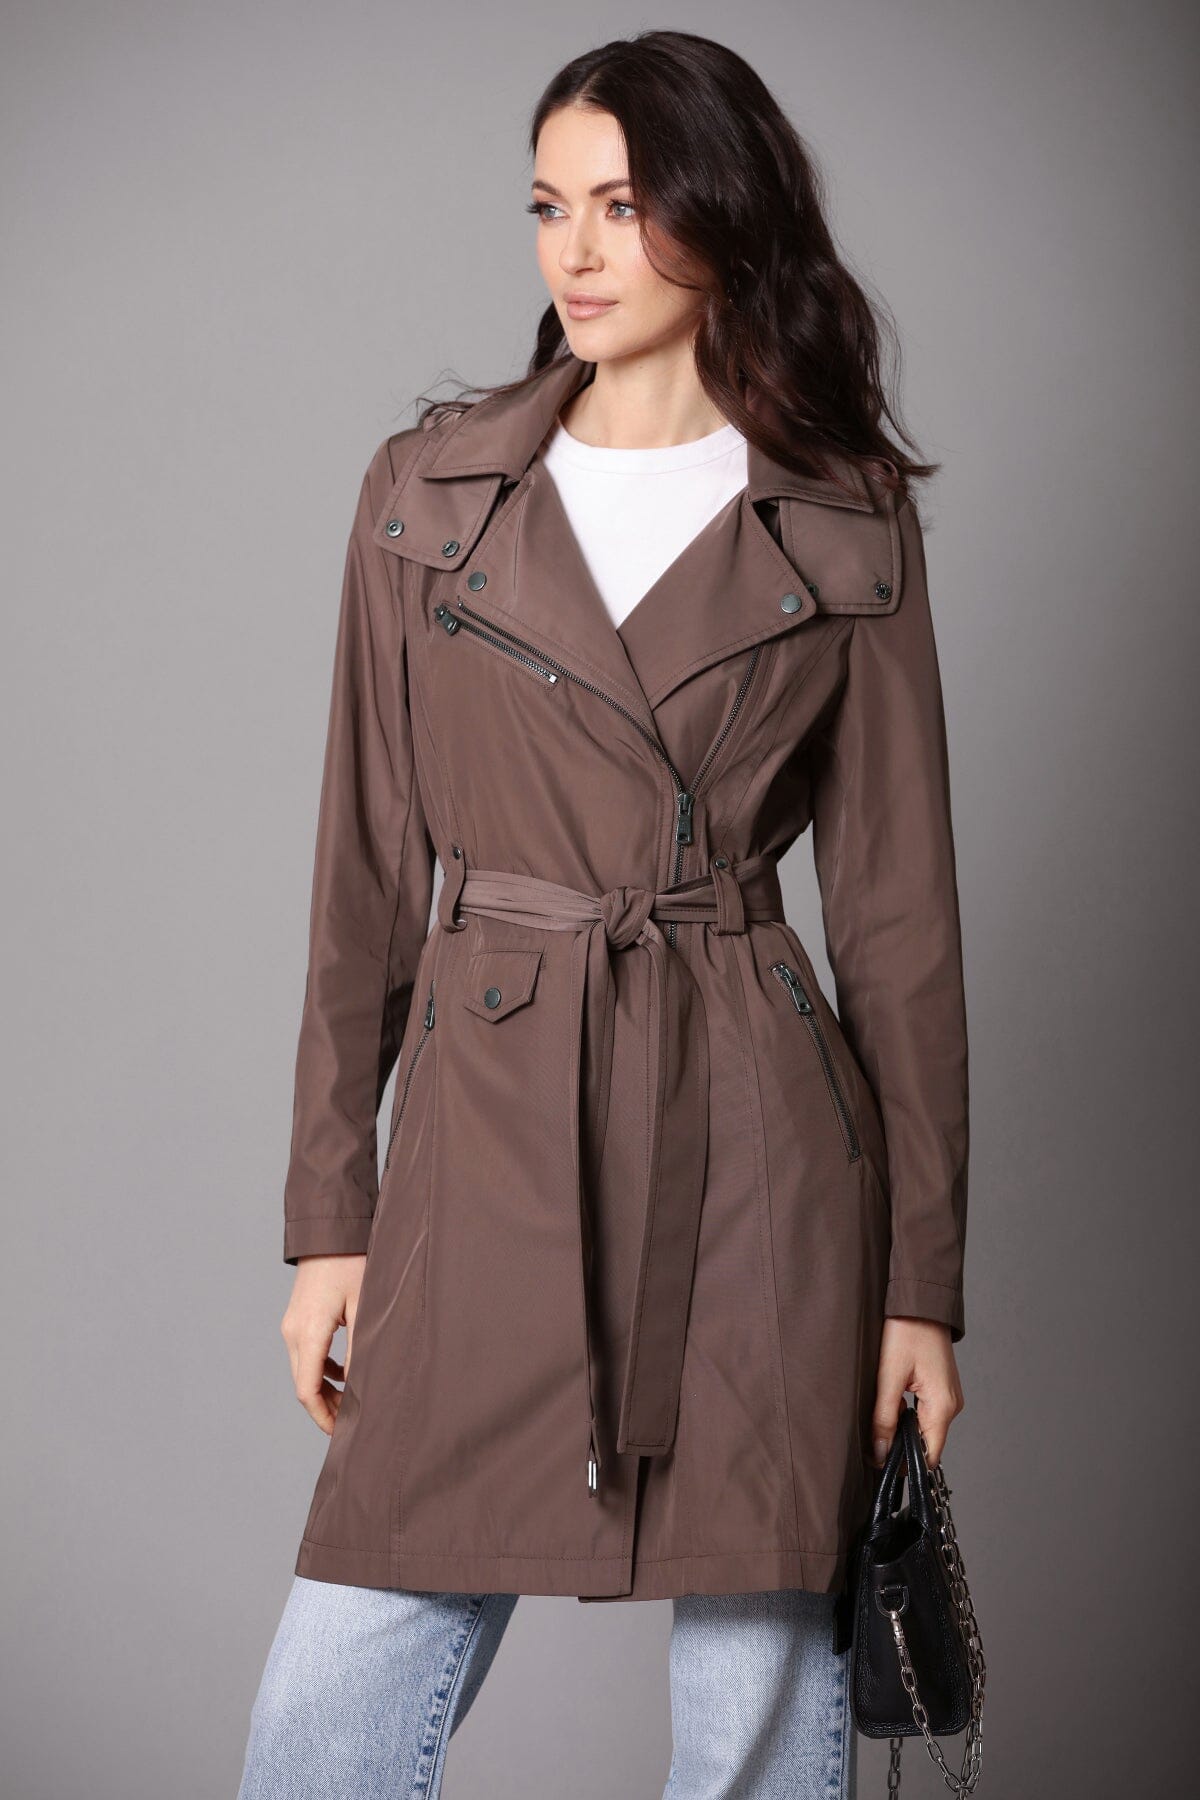 brown belted moto raincoat trench coat figure flattering designer fashion cute water resistant raincoats for women